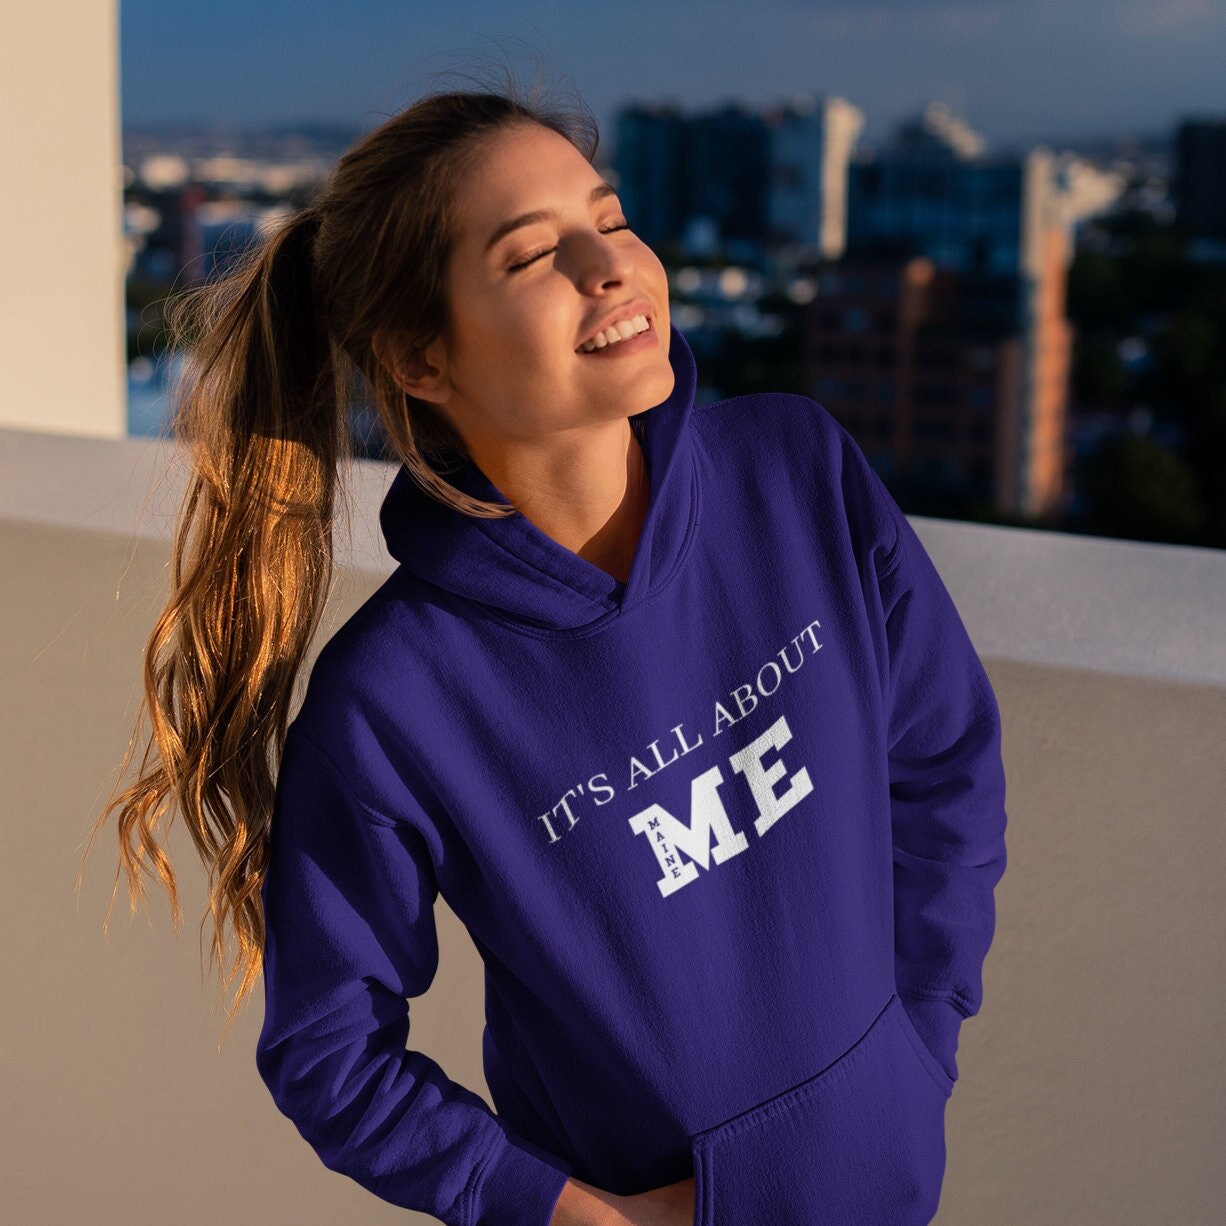 It's All About ME (Maine) hooded sweatshirt - Team Navy Blue